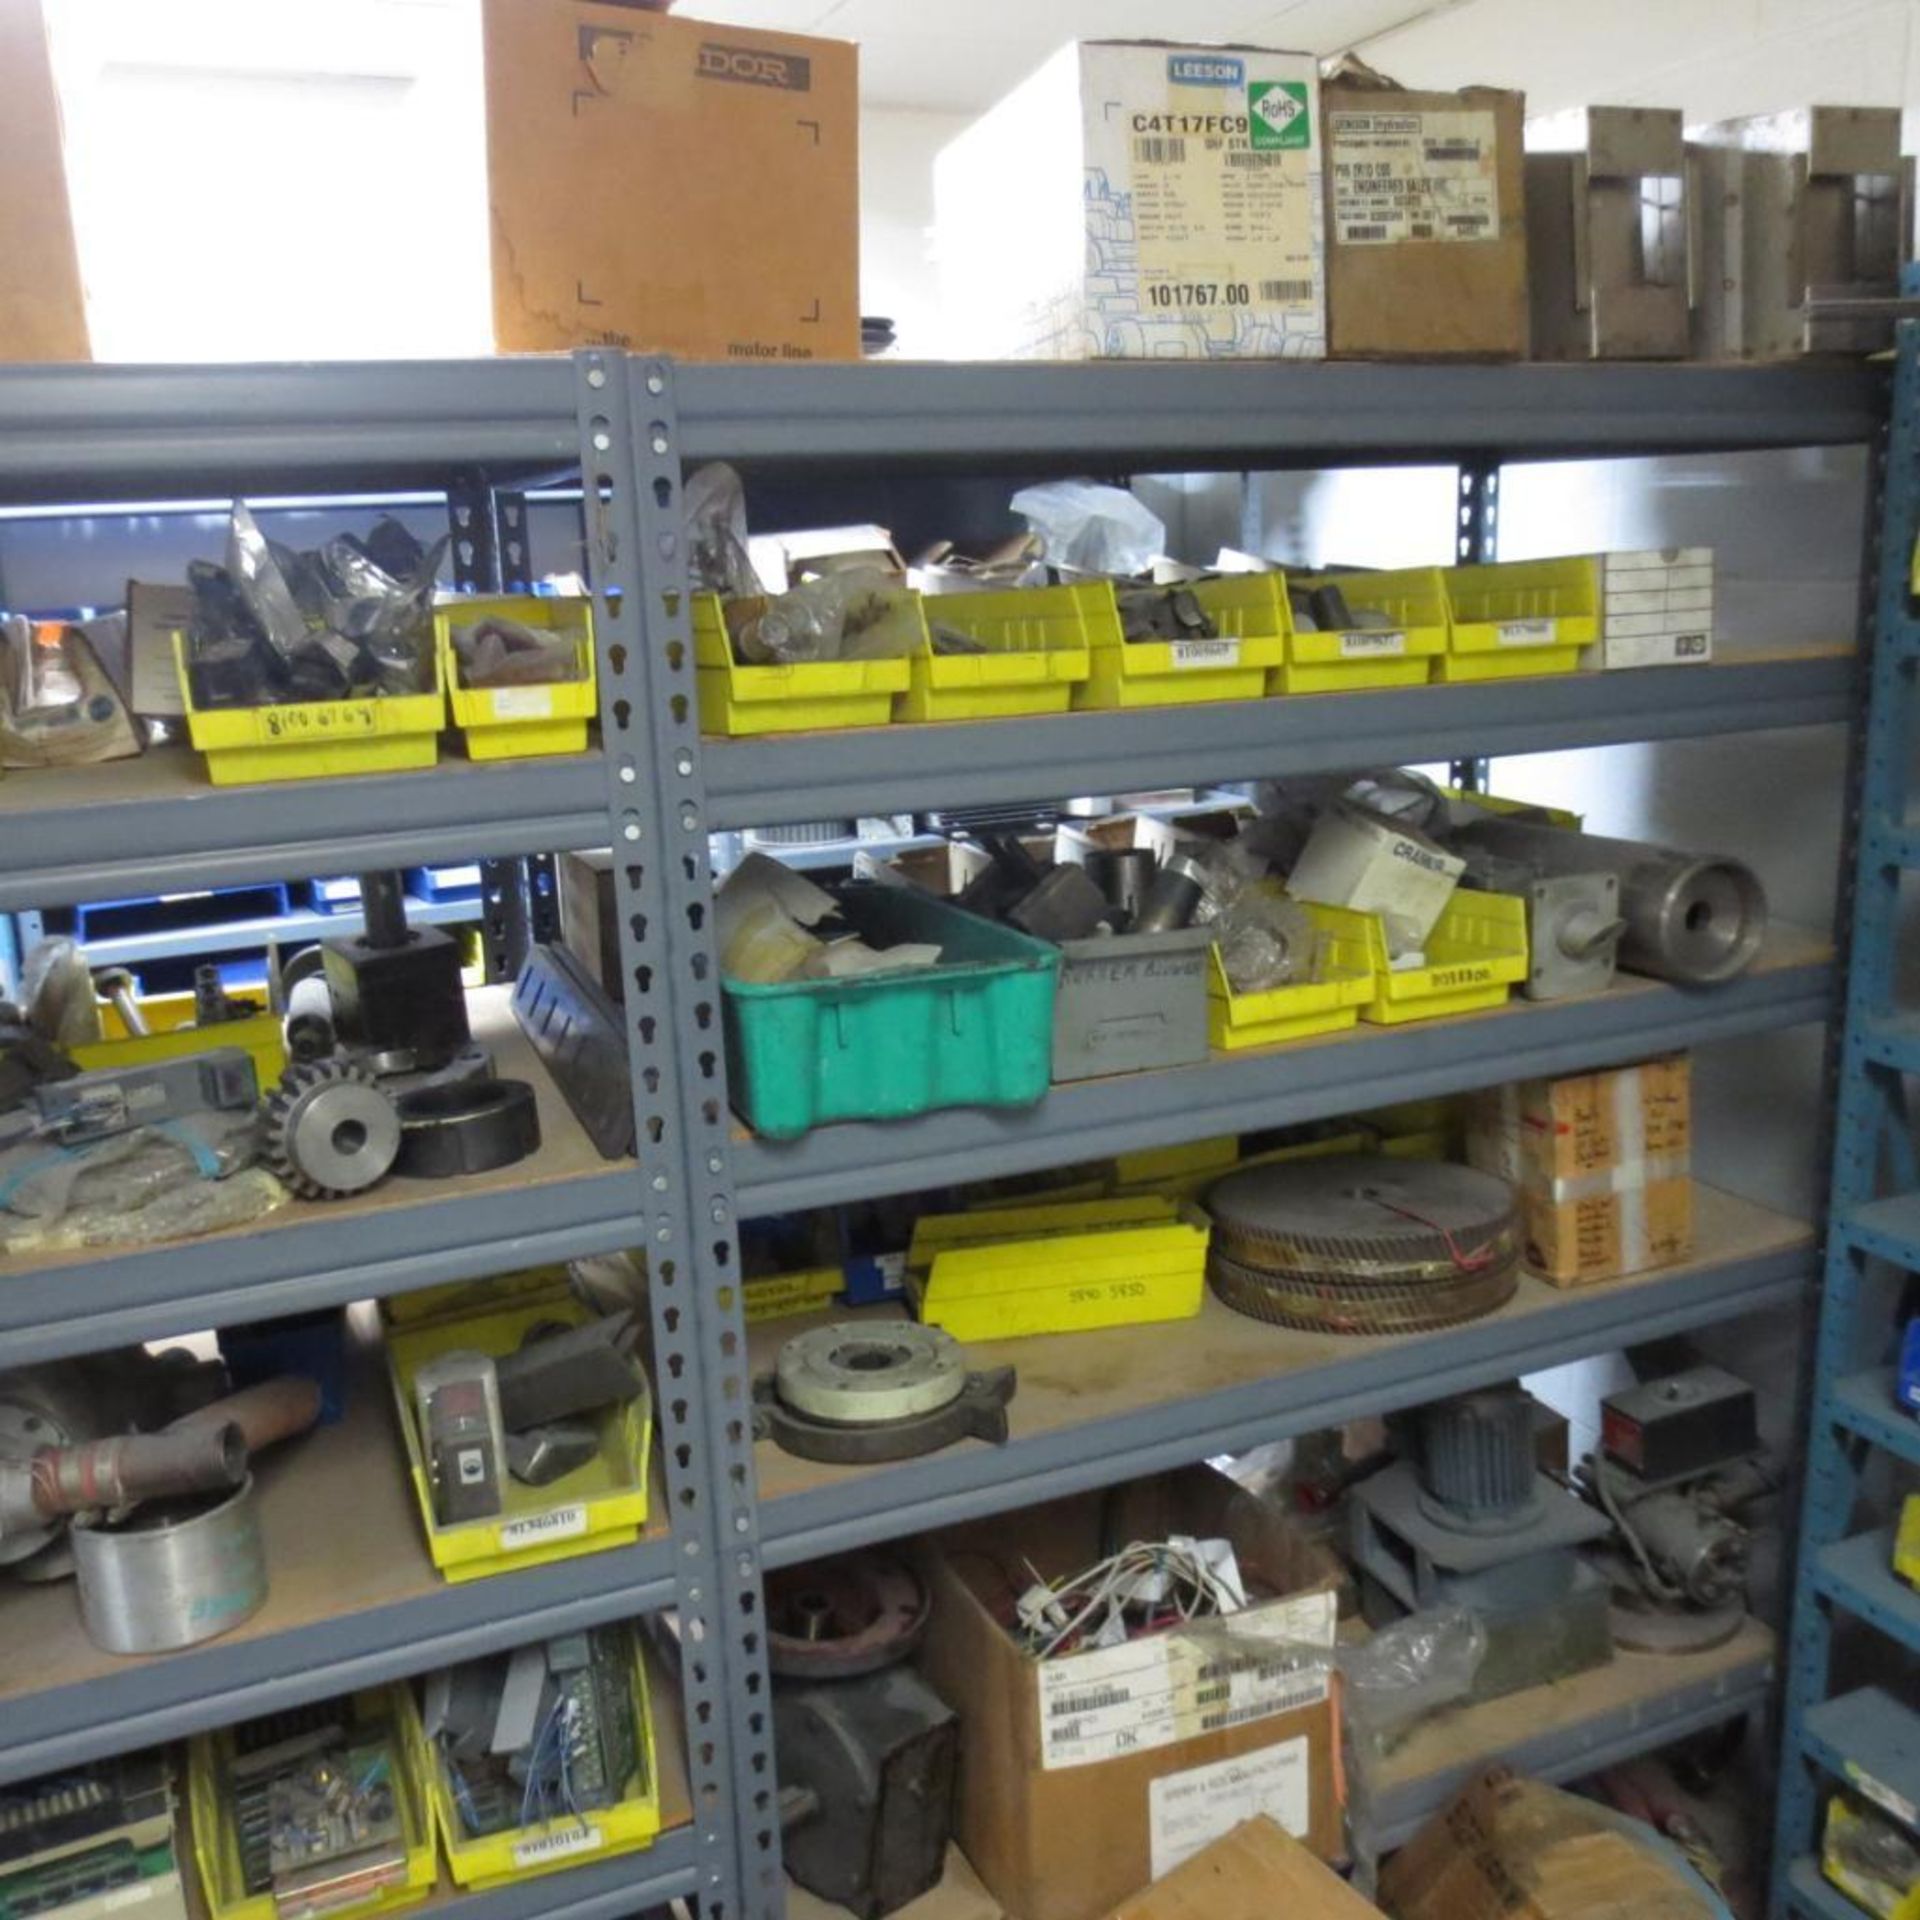 Parts Room Consisting of Gears, Electric Boards, Motors, AB Item, Filters, Motor Starters and Parts - Image 3 of 42